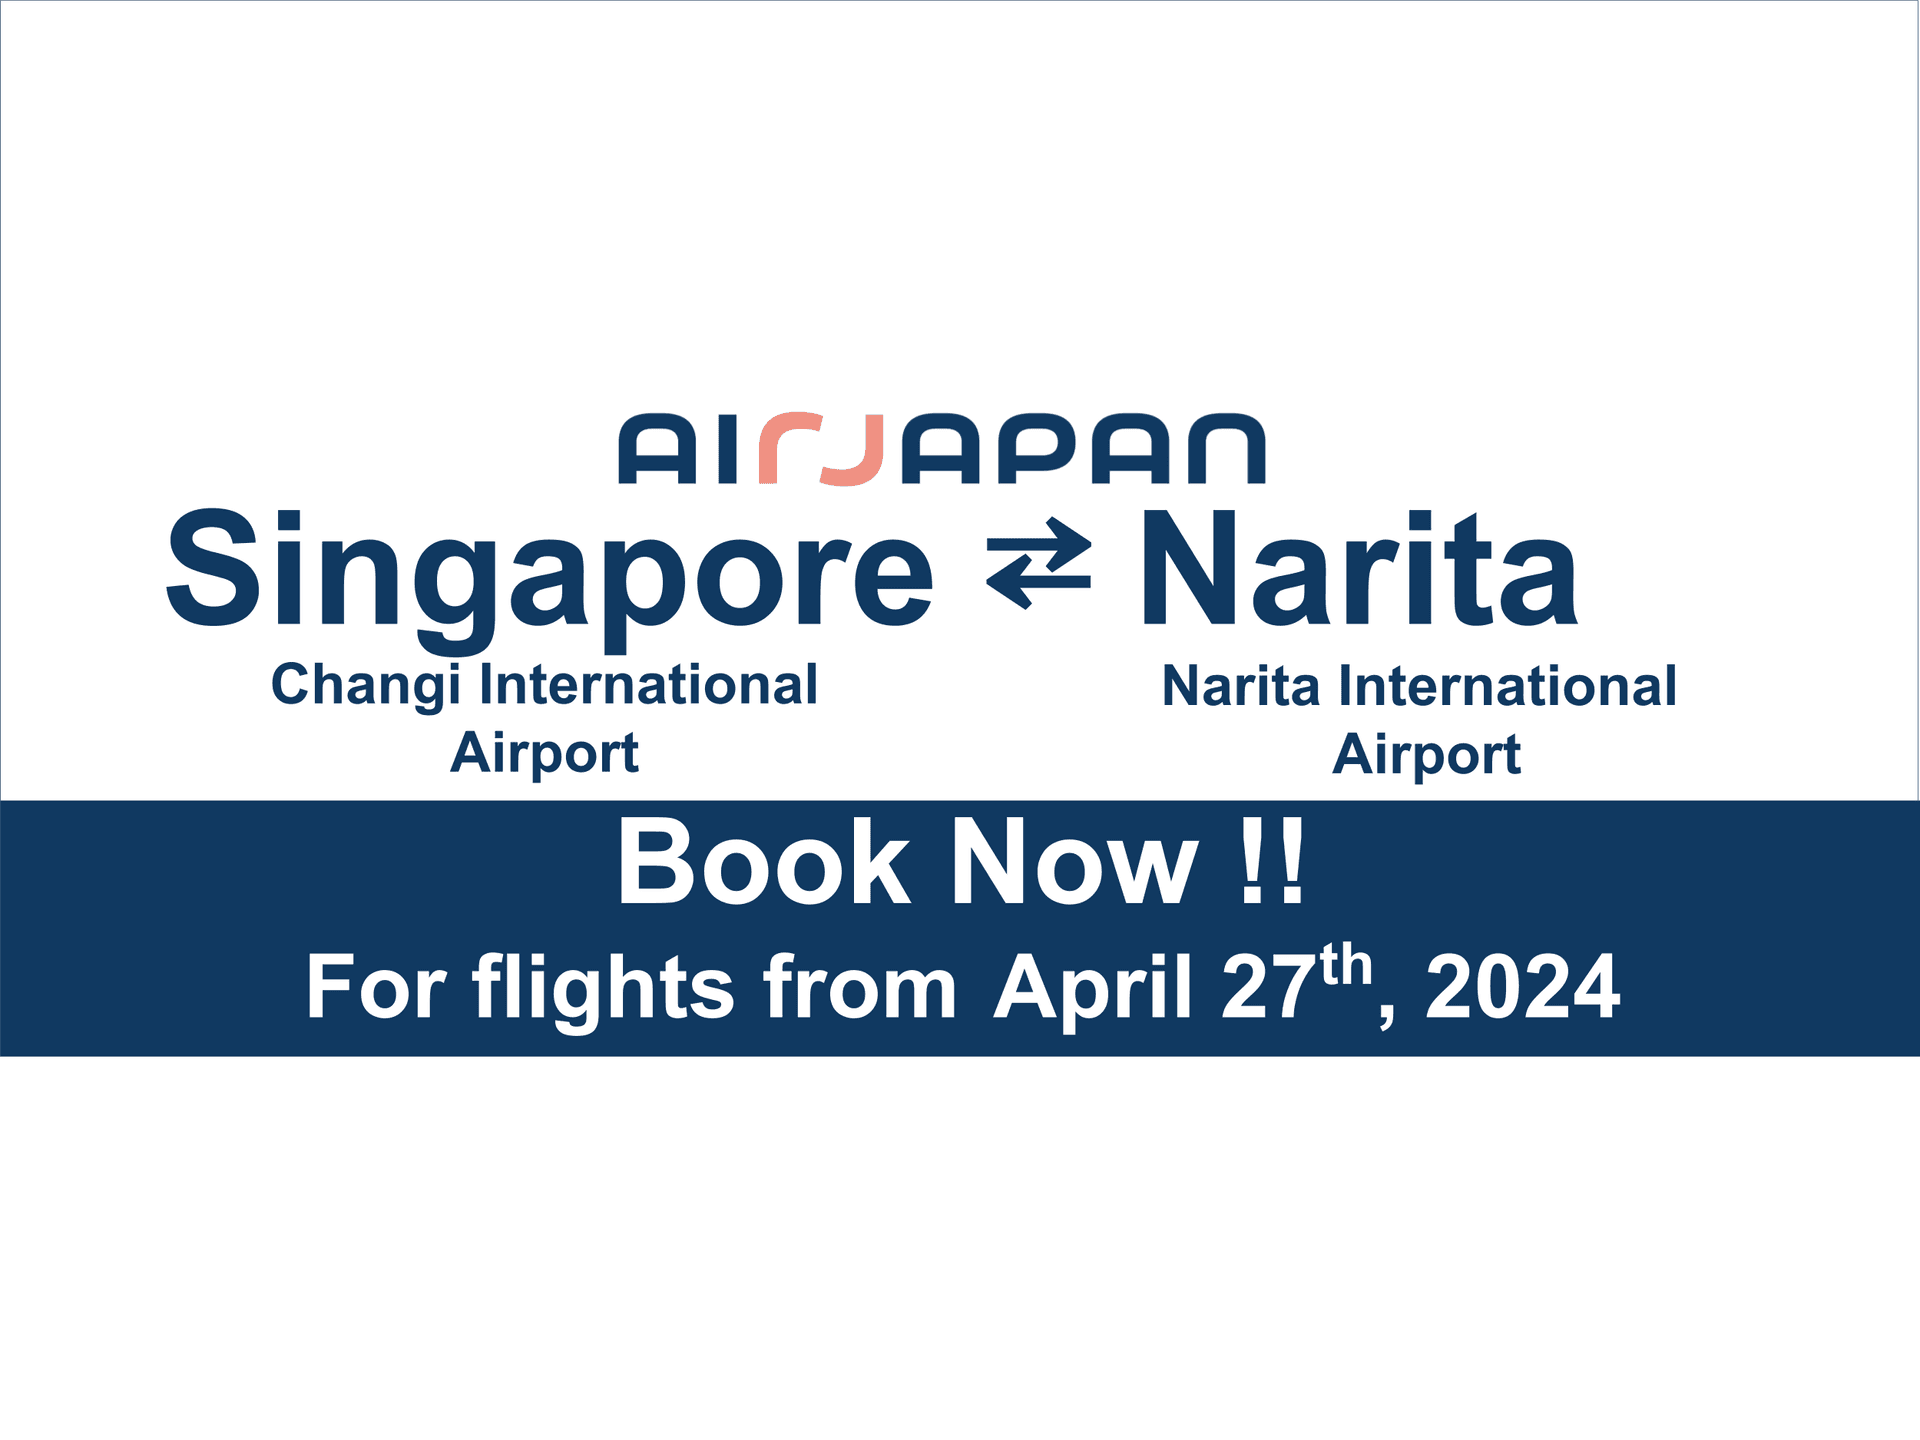 AirJapan will hold direct flight Narita and Singapore on 27th April 2024.